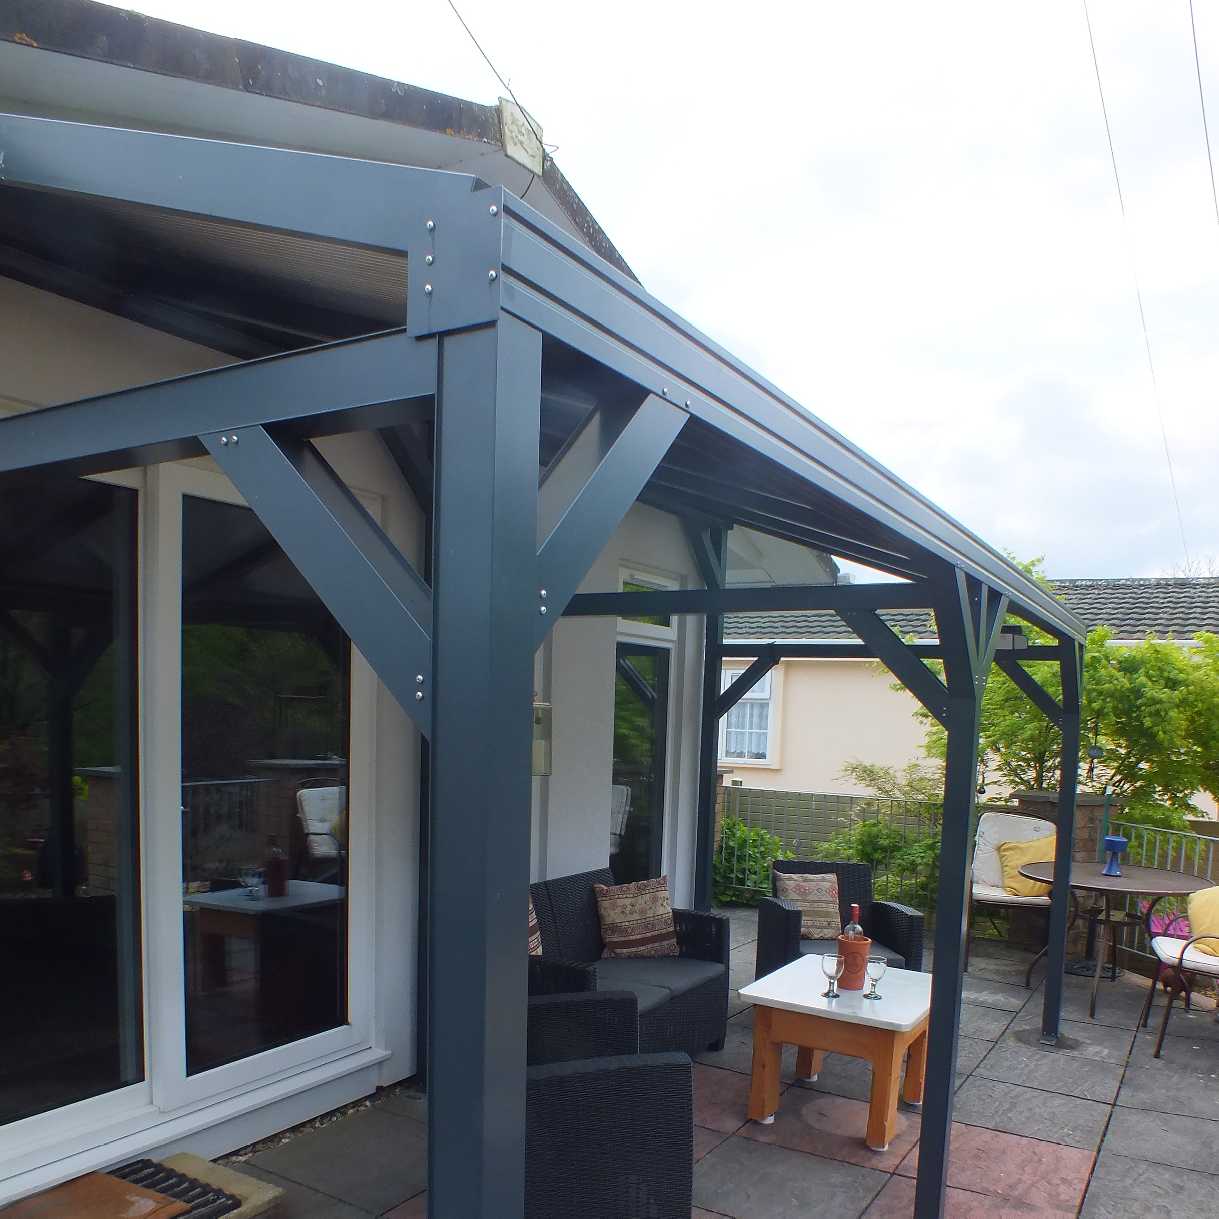 Affordable Omega Smart Free-Standing, Anthracite Grey MonoPitch Roof Canopy with 16mm Polycarbonate Glazing - 3.1m (W) x 2.0m (P), (4) Supporting Posts